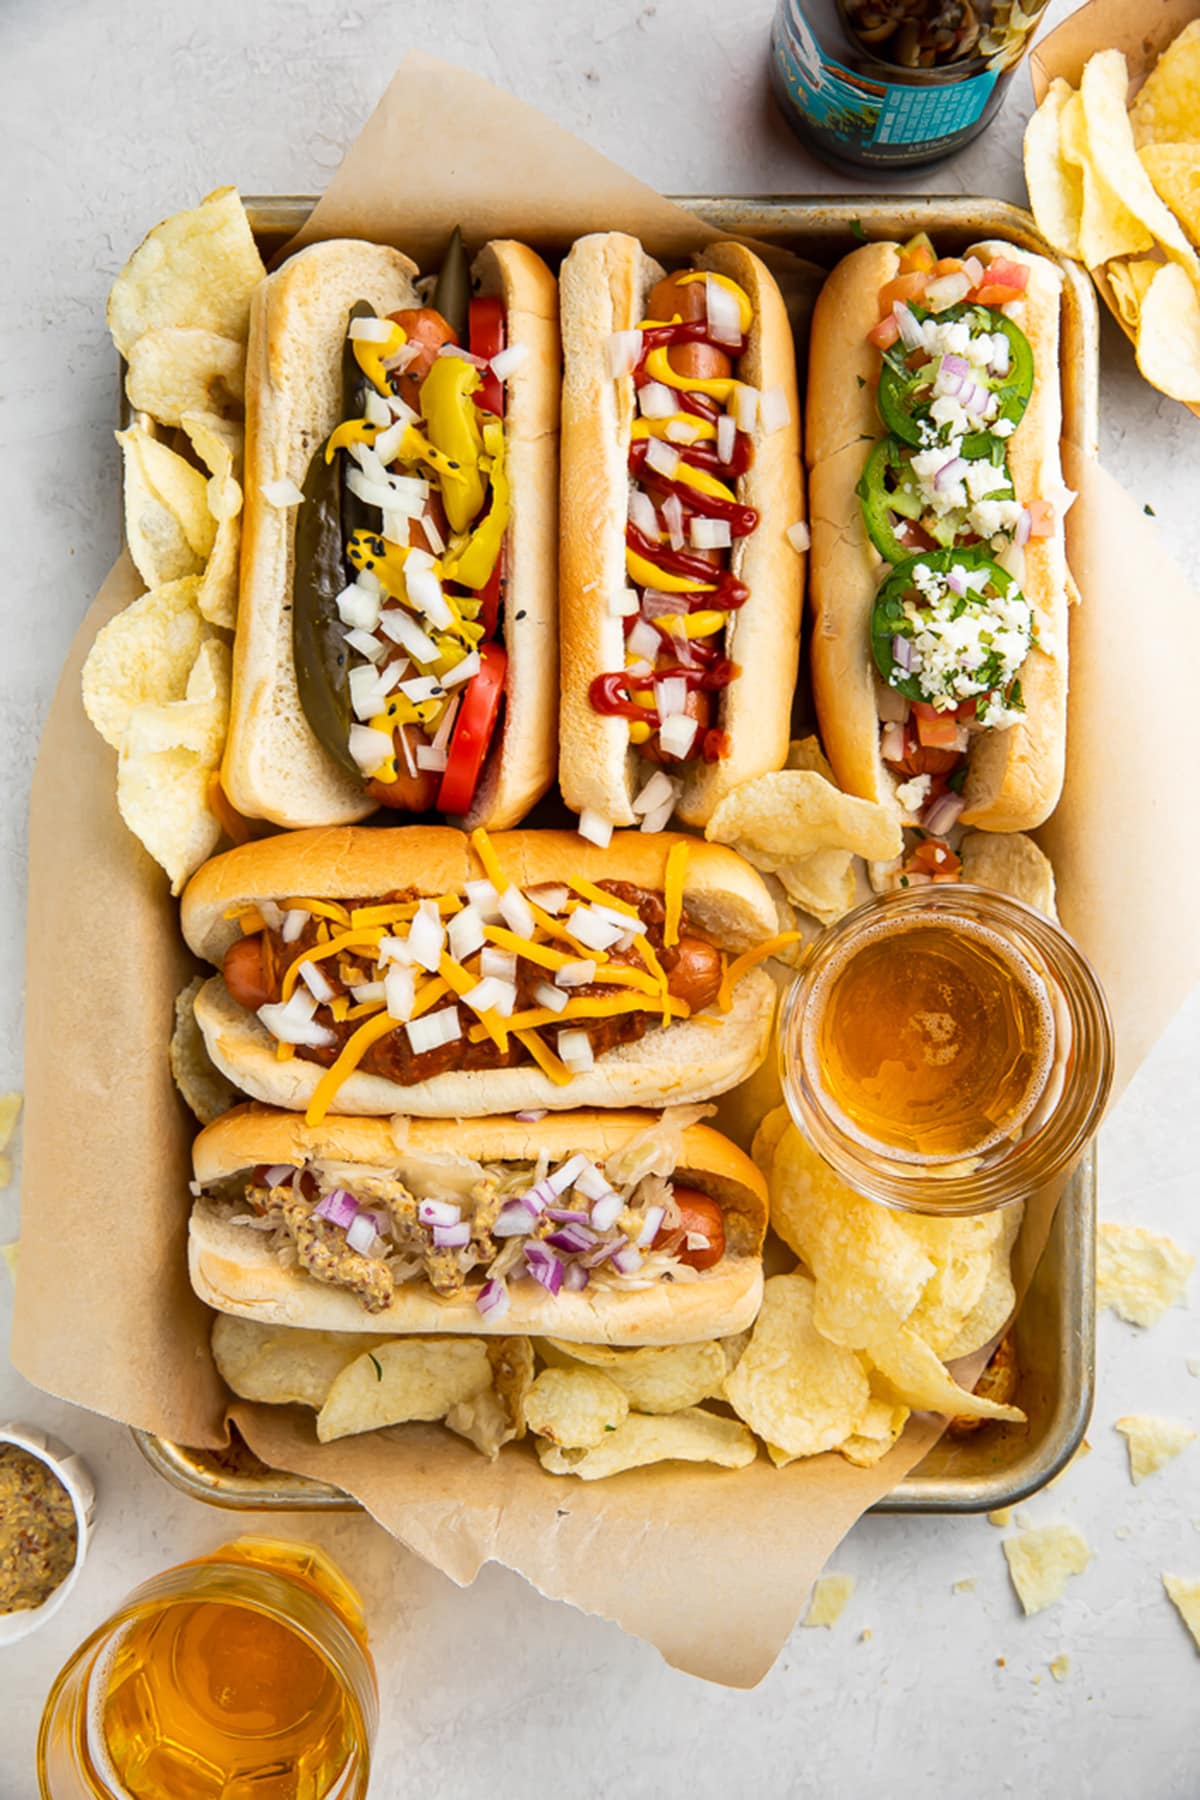 5 air fryer hot dogs in hot dog buns with various toppings arranged on a baking sheet.